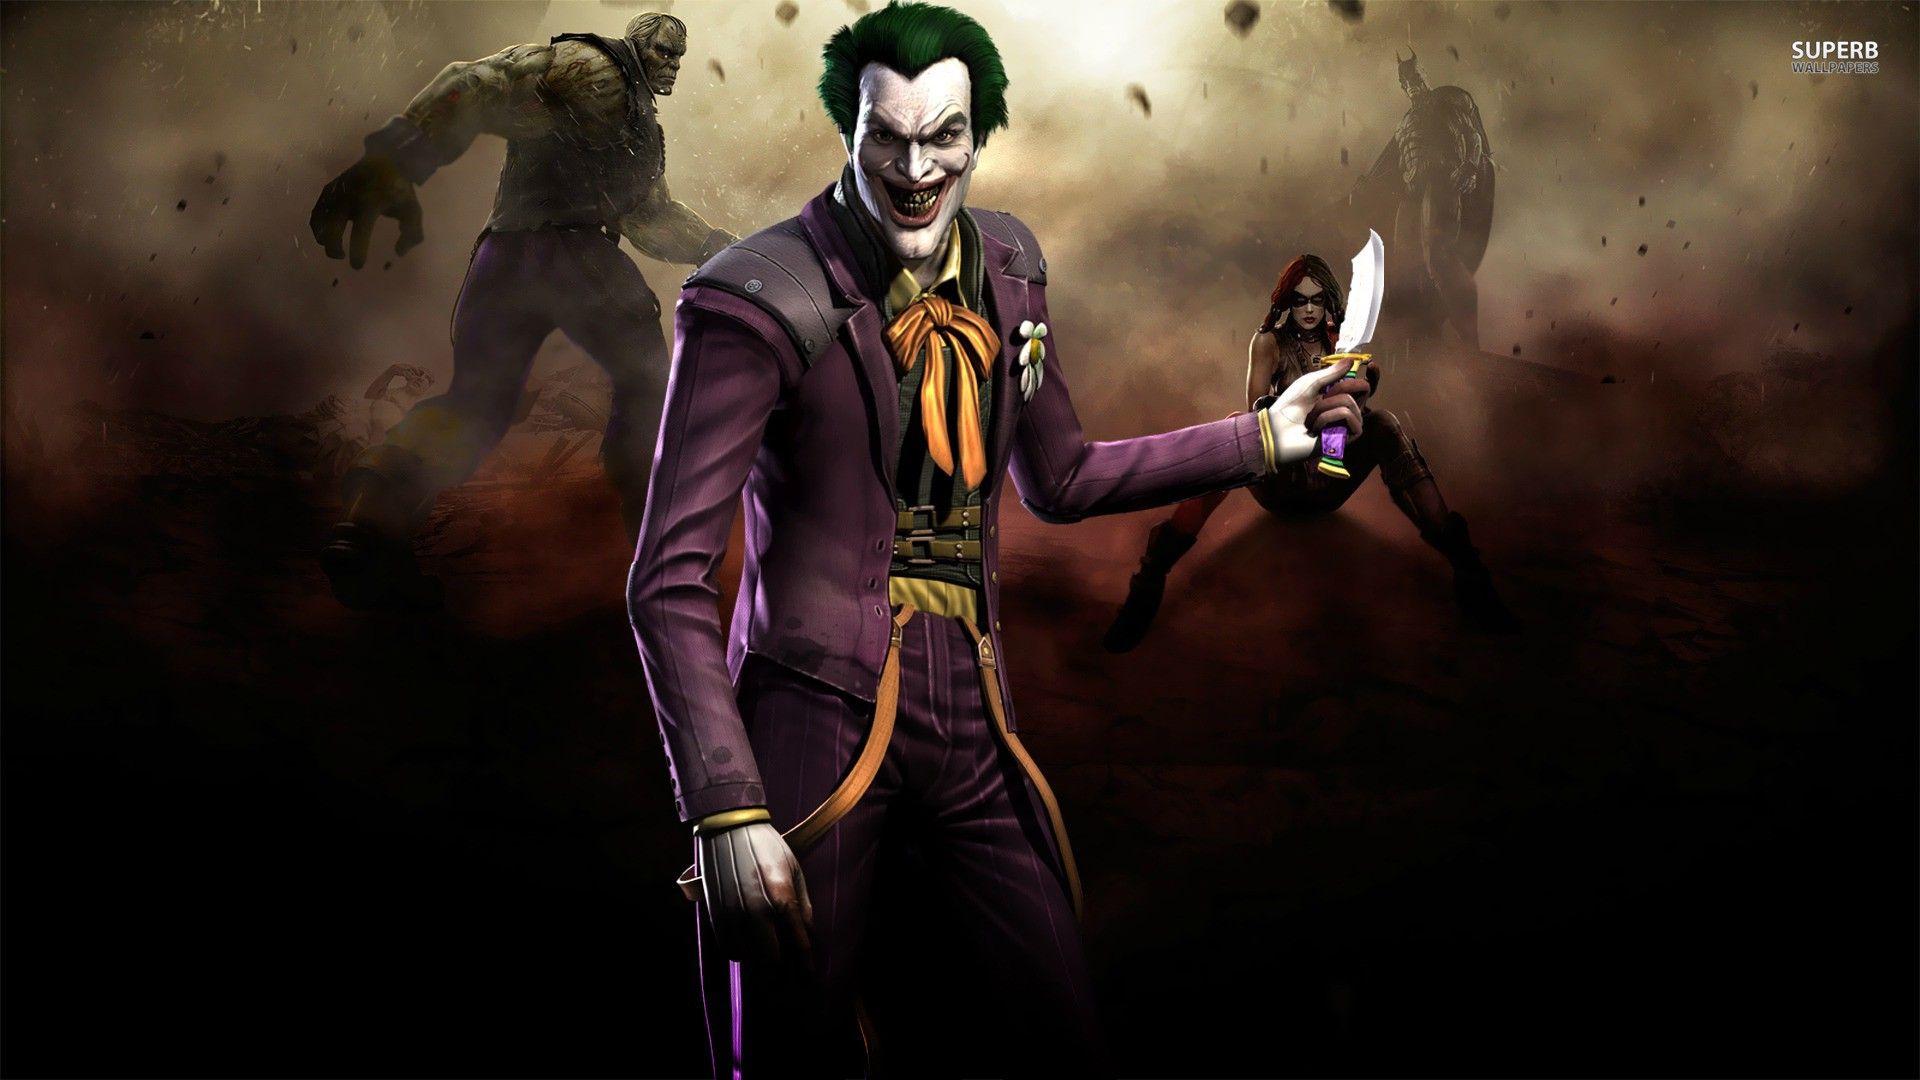 awesome wallpapers hd 1080p joker